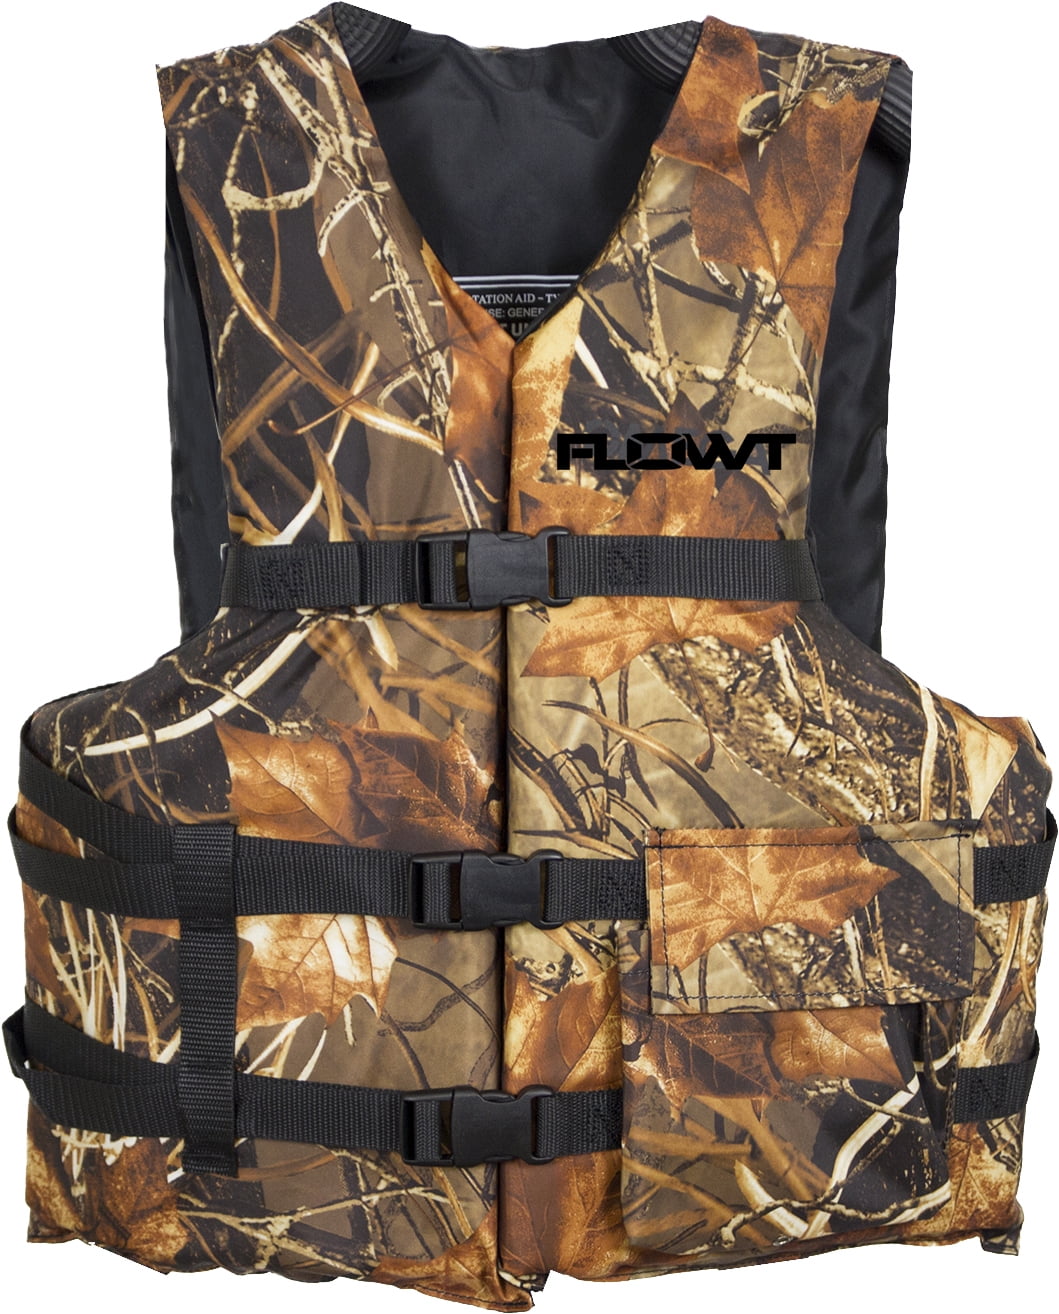 FLOWT Fishing Angler Life Vest - USCG Approved Type III PFD